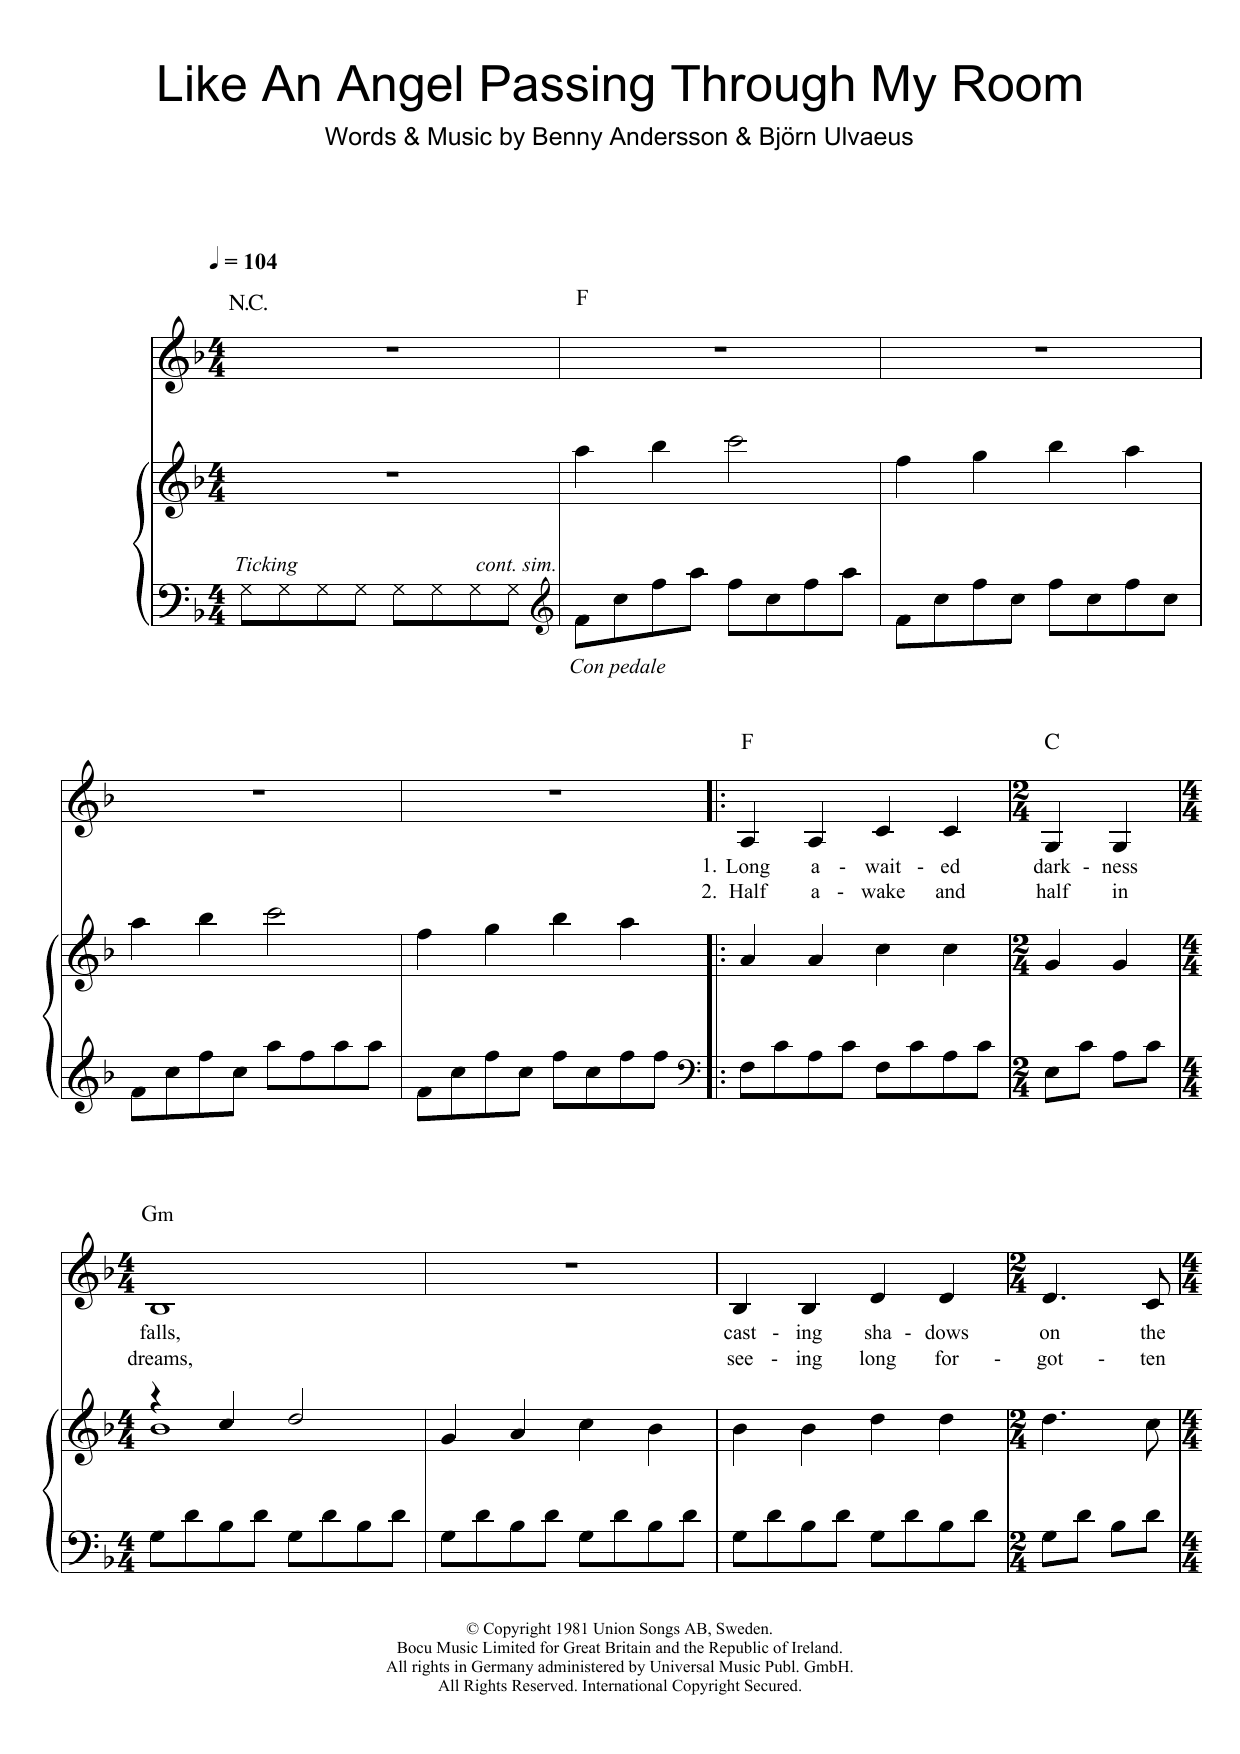 Download ABBA Like An Angel Passing Through My Room Sheet Music